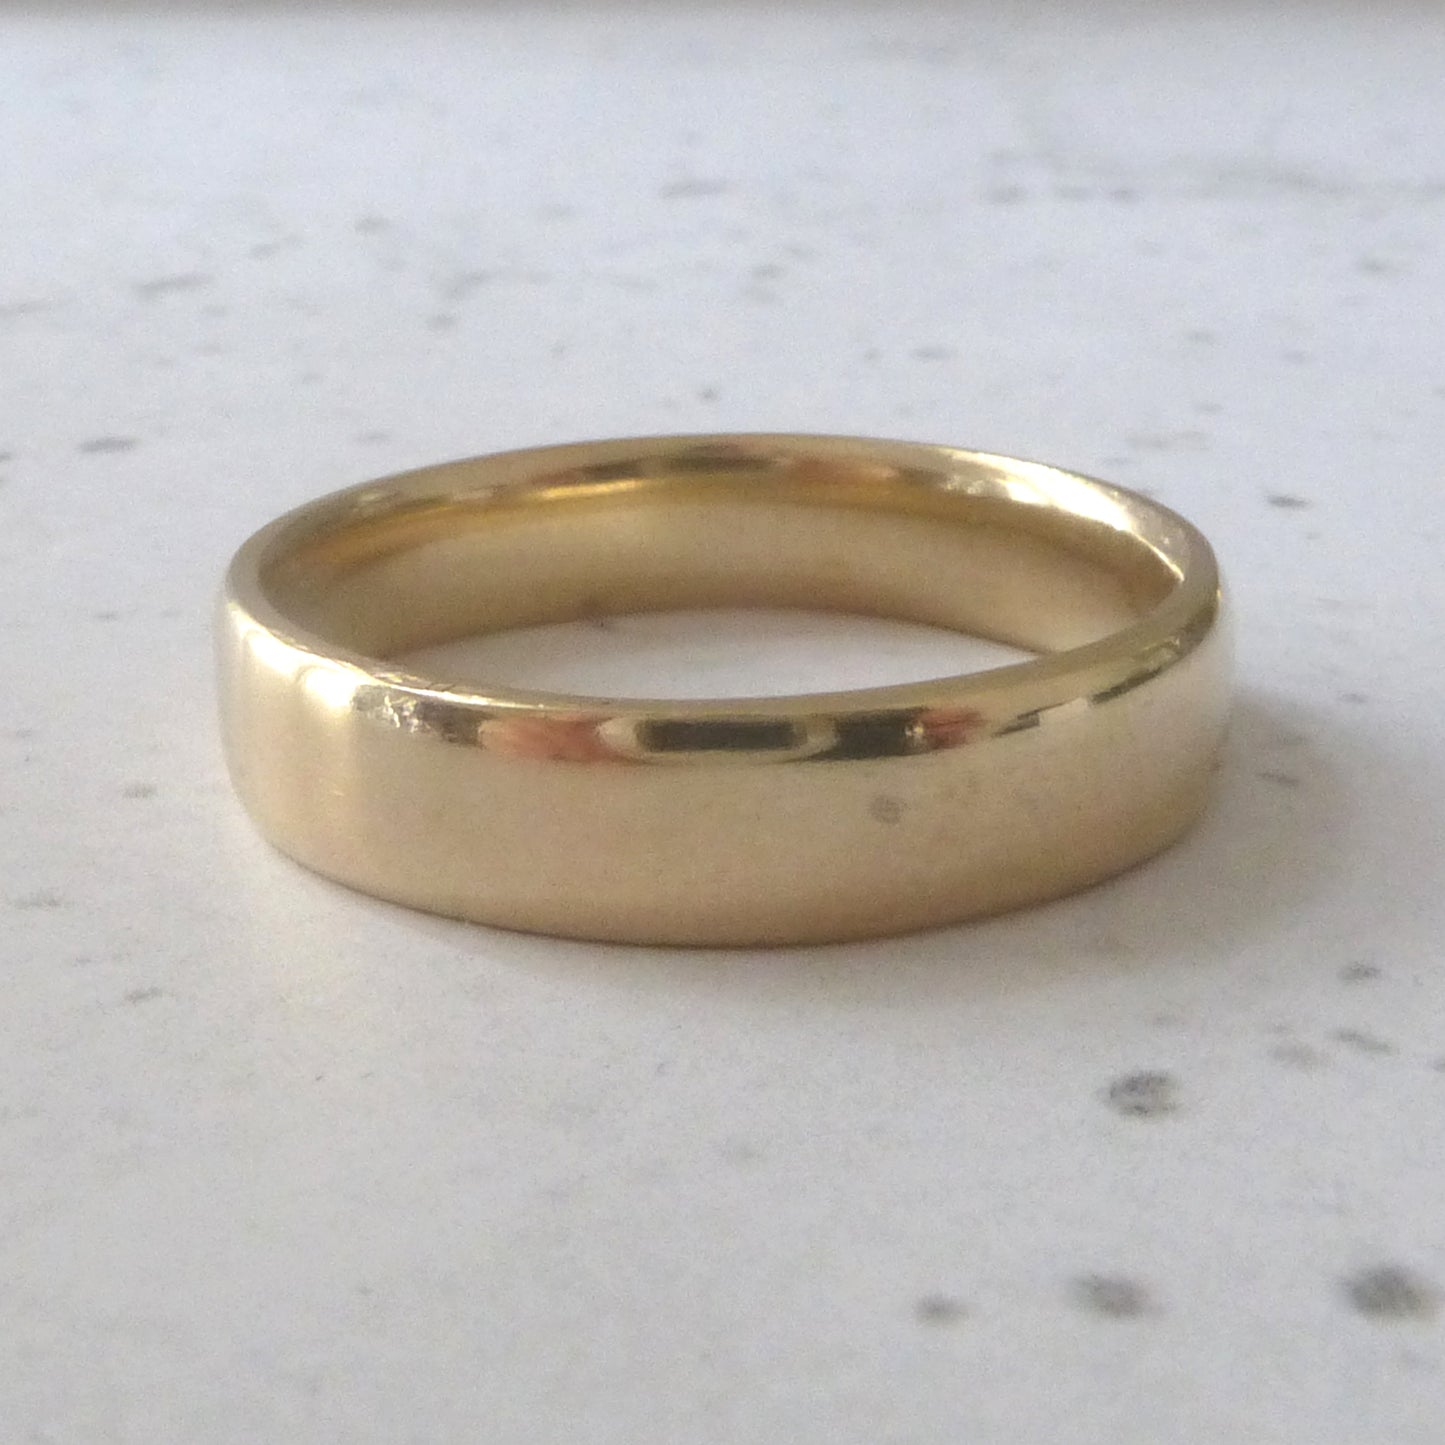 Smooth handmade wedding band in recycled 9ct yelllow gold, soft court profile